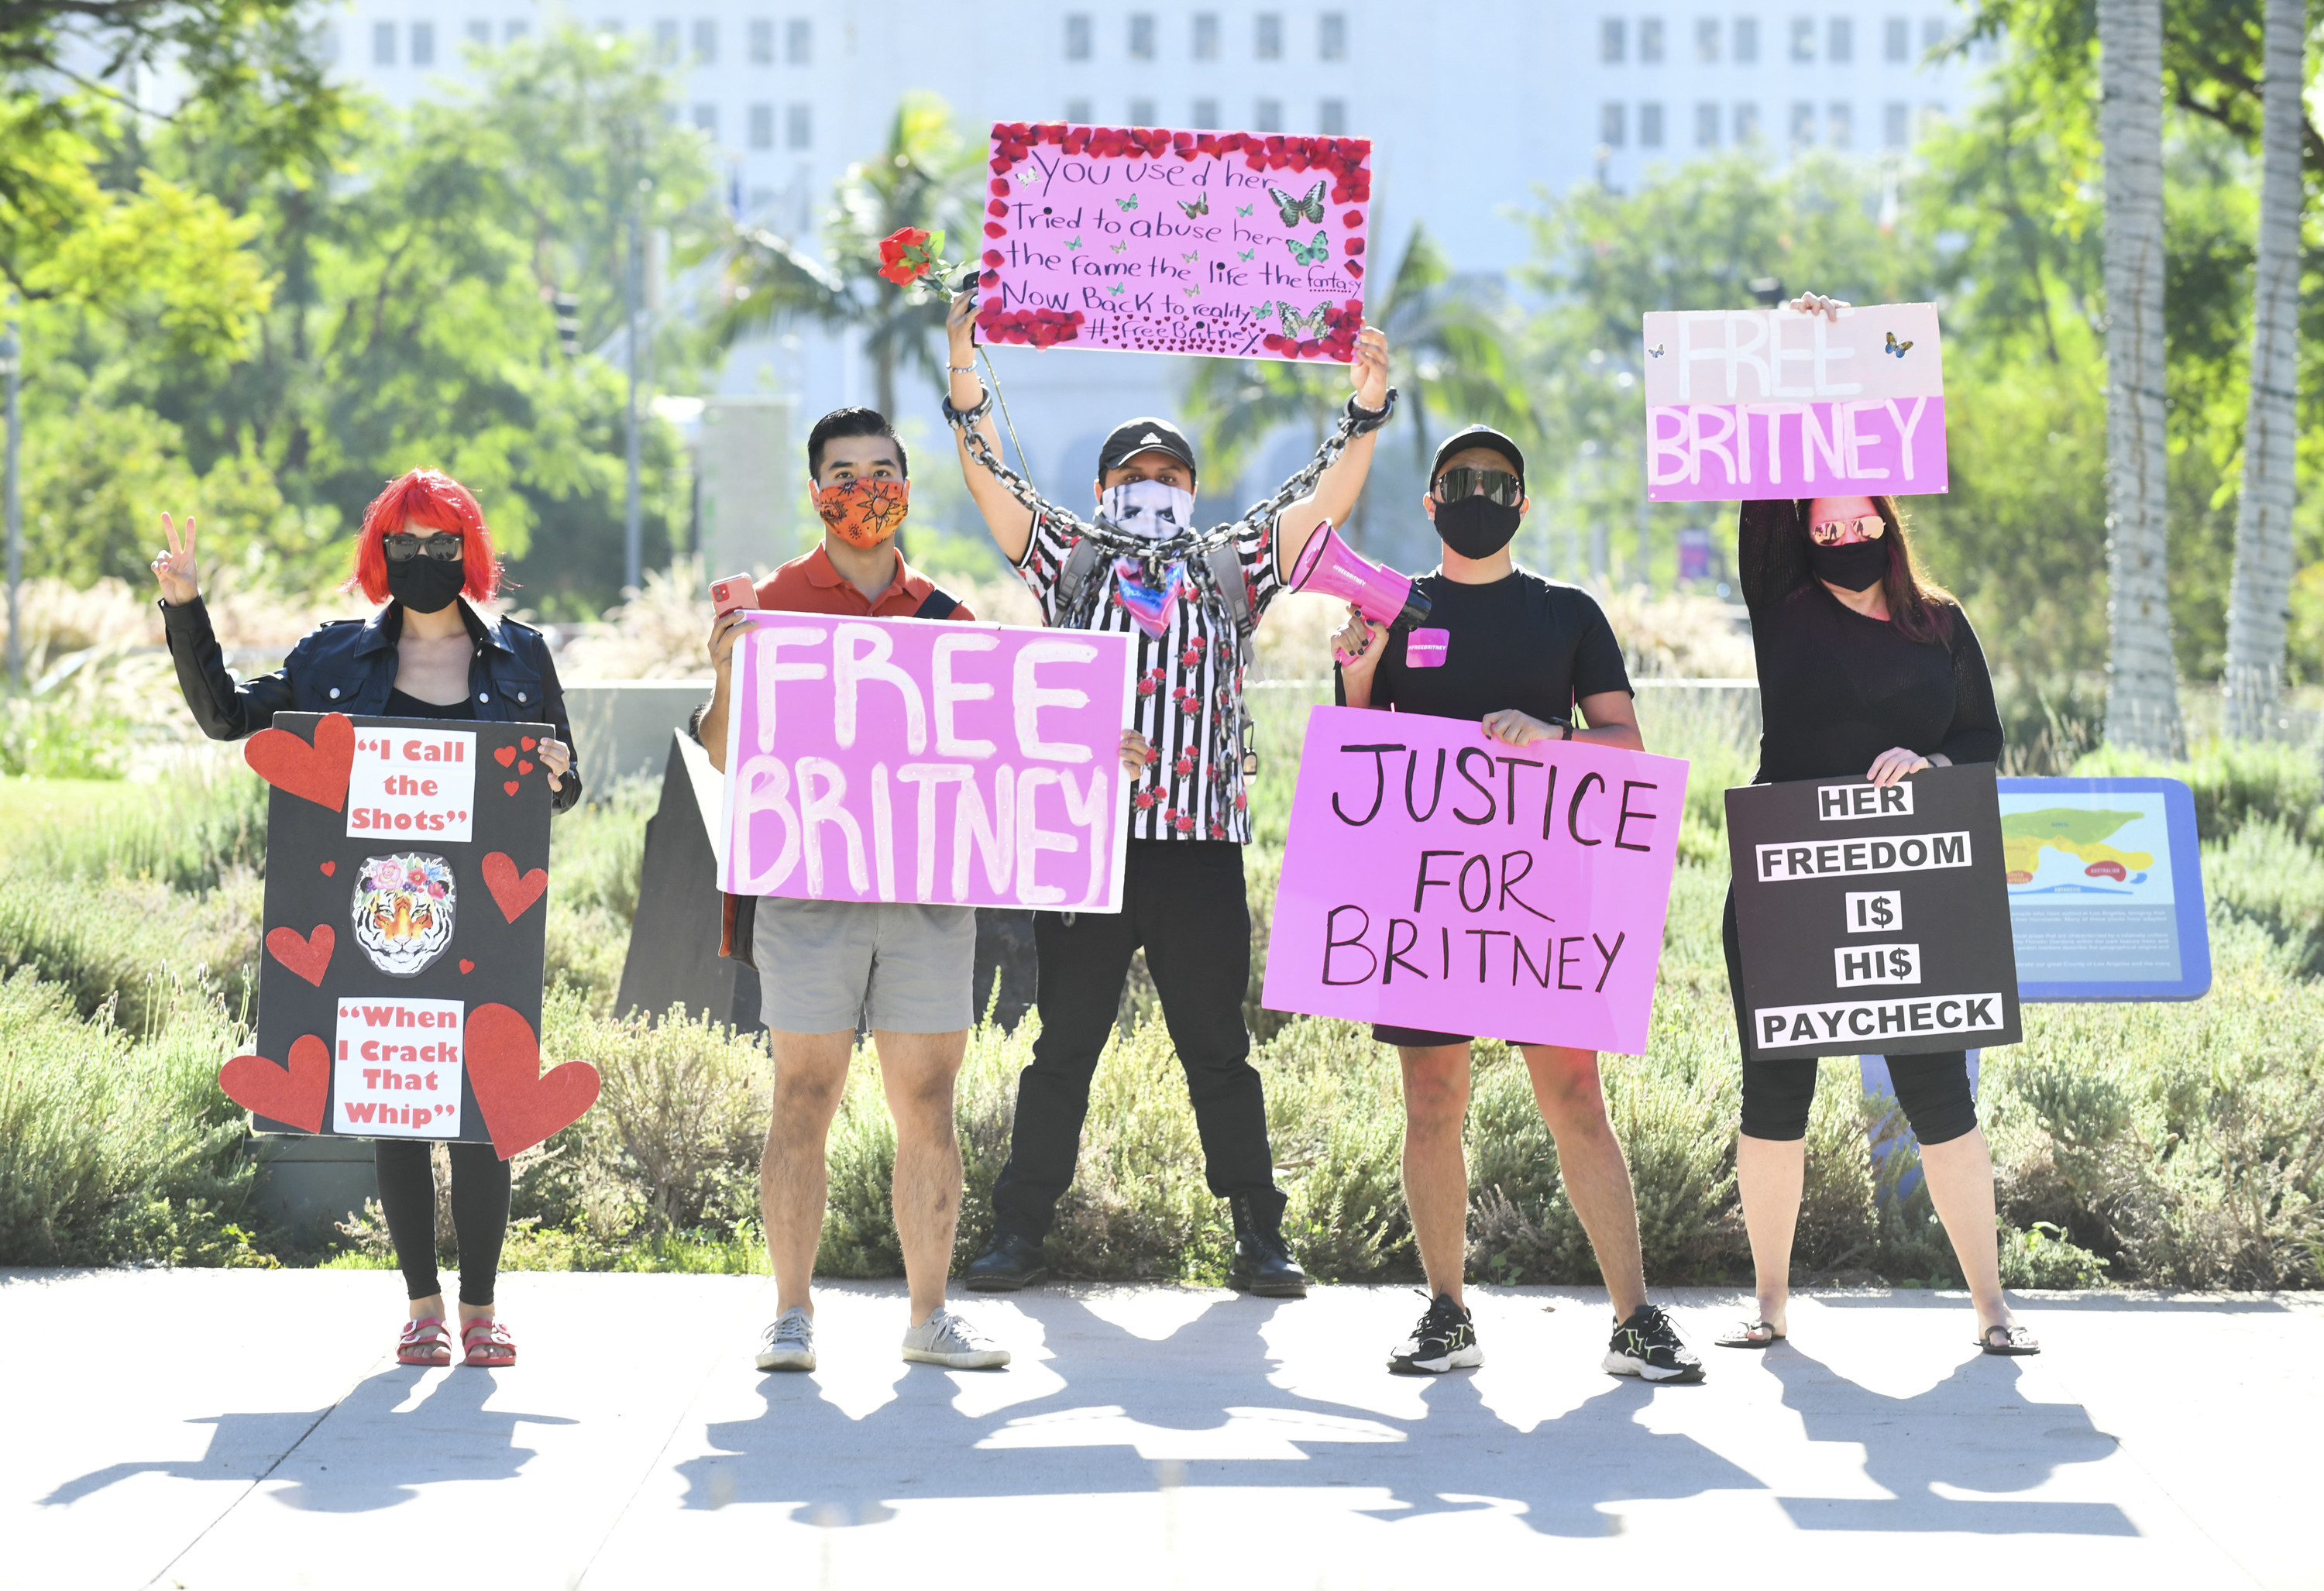 Protesters carry signs that read &quot;Free Britney,&quot; &quot;Justice for Britney&quot; and &quot;Her Freedom Is His Paycheck&quot;